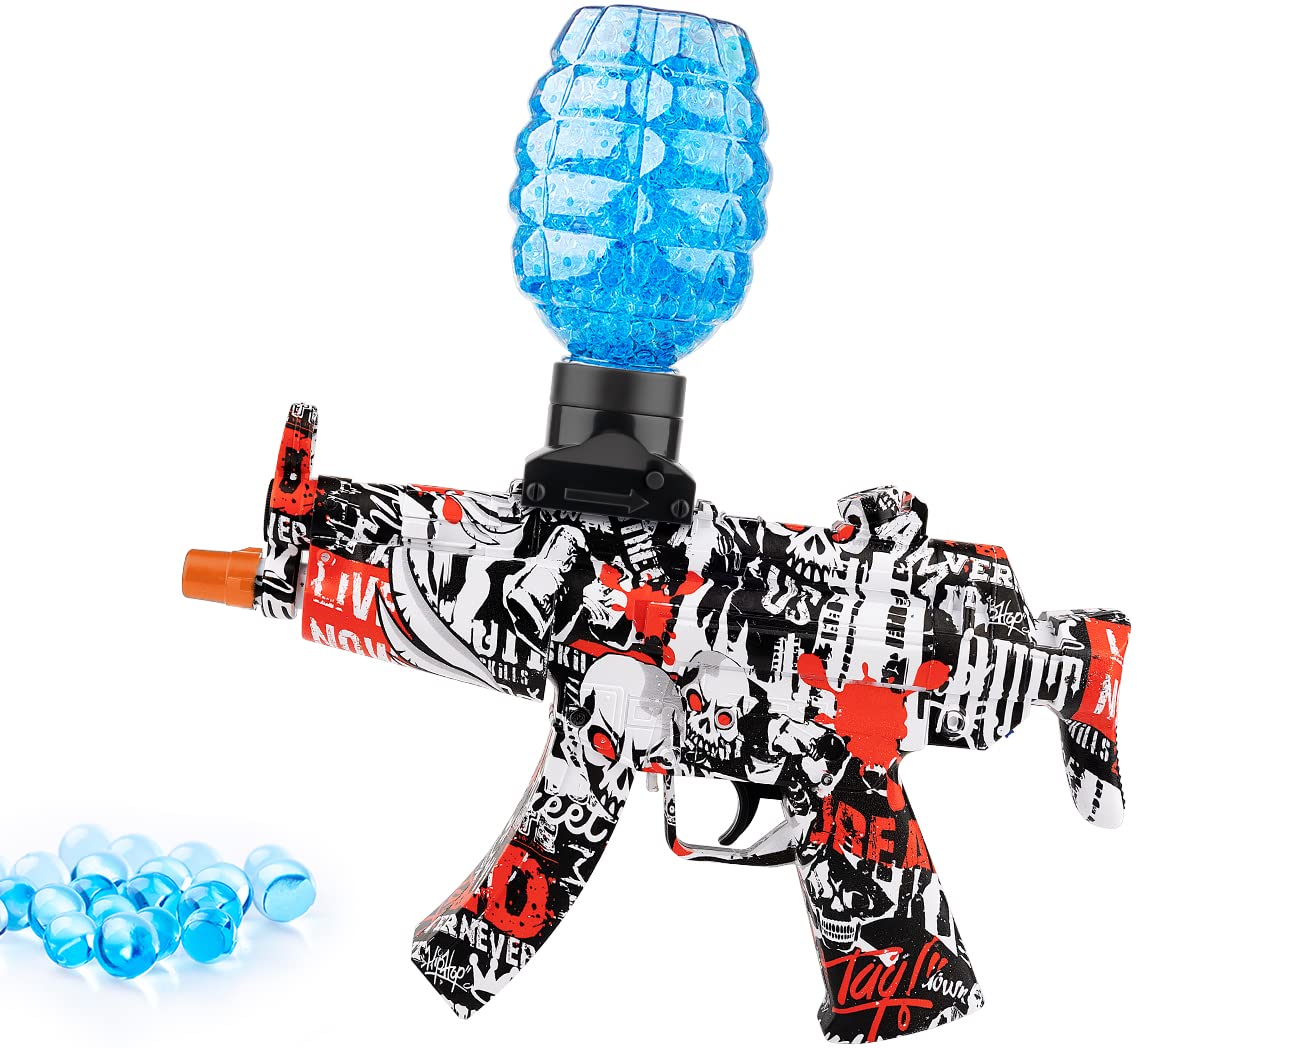 Maisiny Electric Gel Ball Blaster - Automatic Splatter Blaster Mp5 Splat Ball Blaster With Goggles And Gel Balls For Adults And